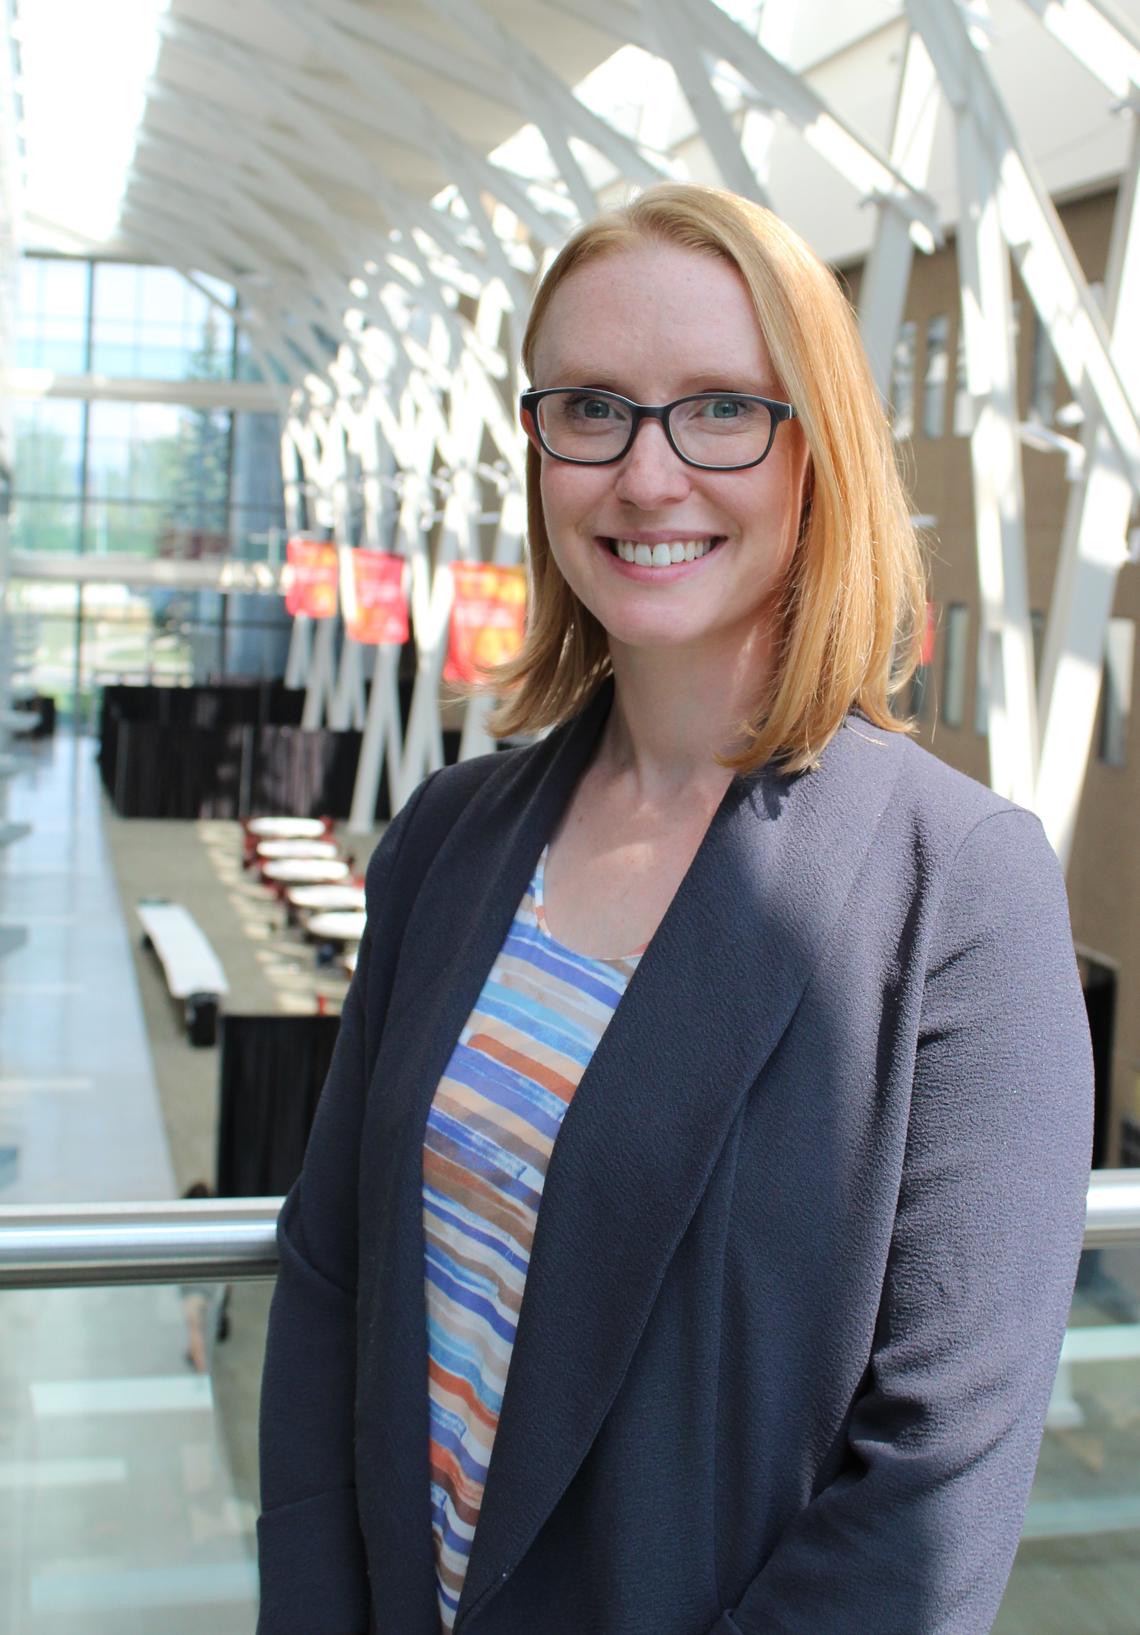 UCalgary researcher Dr. Leslie Skeith, MD